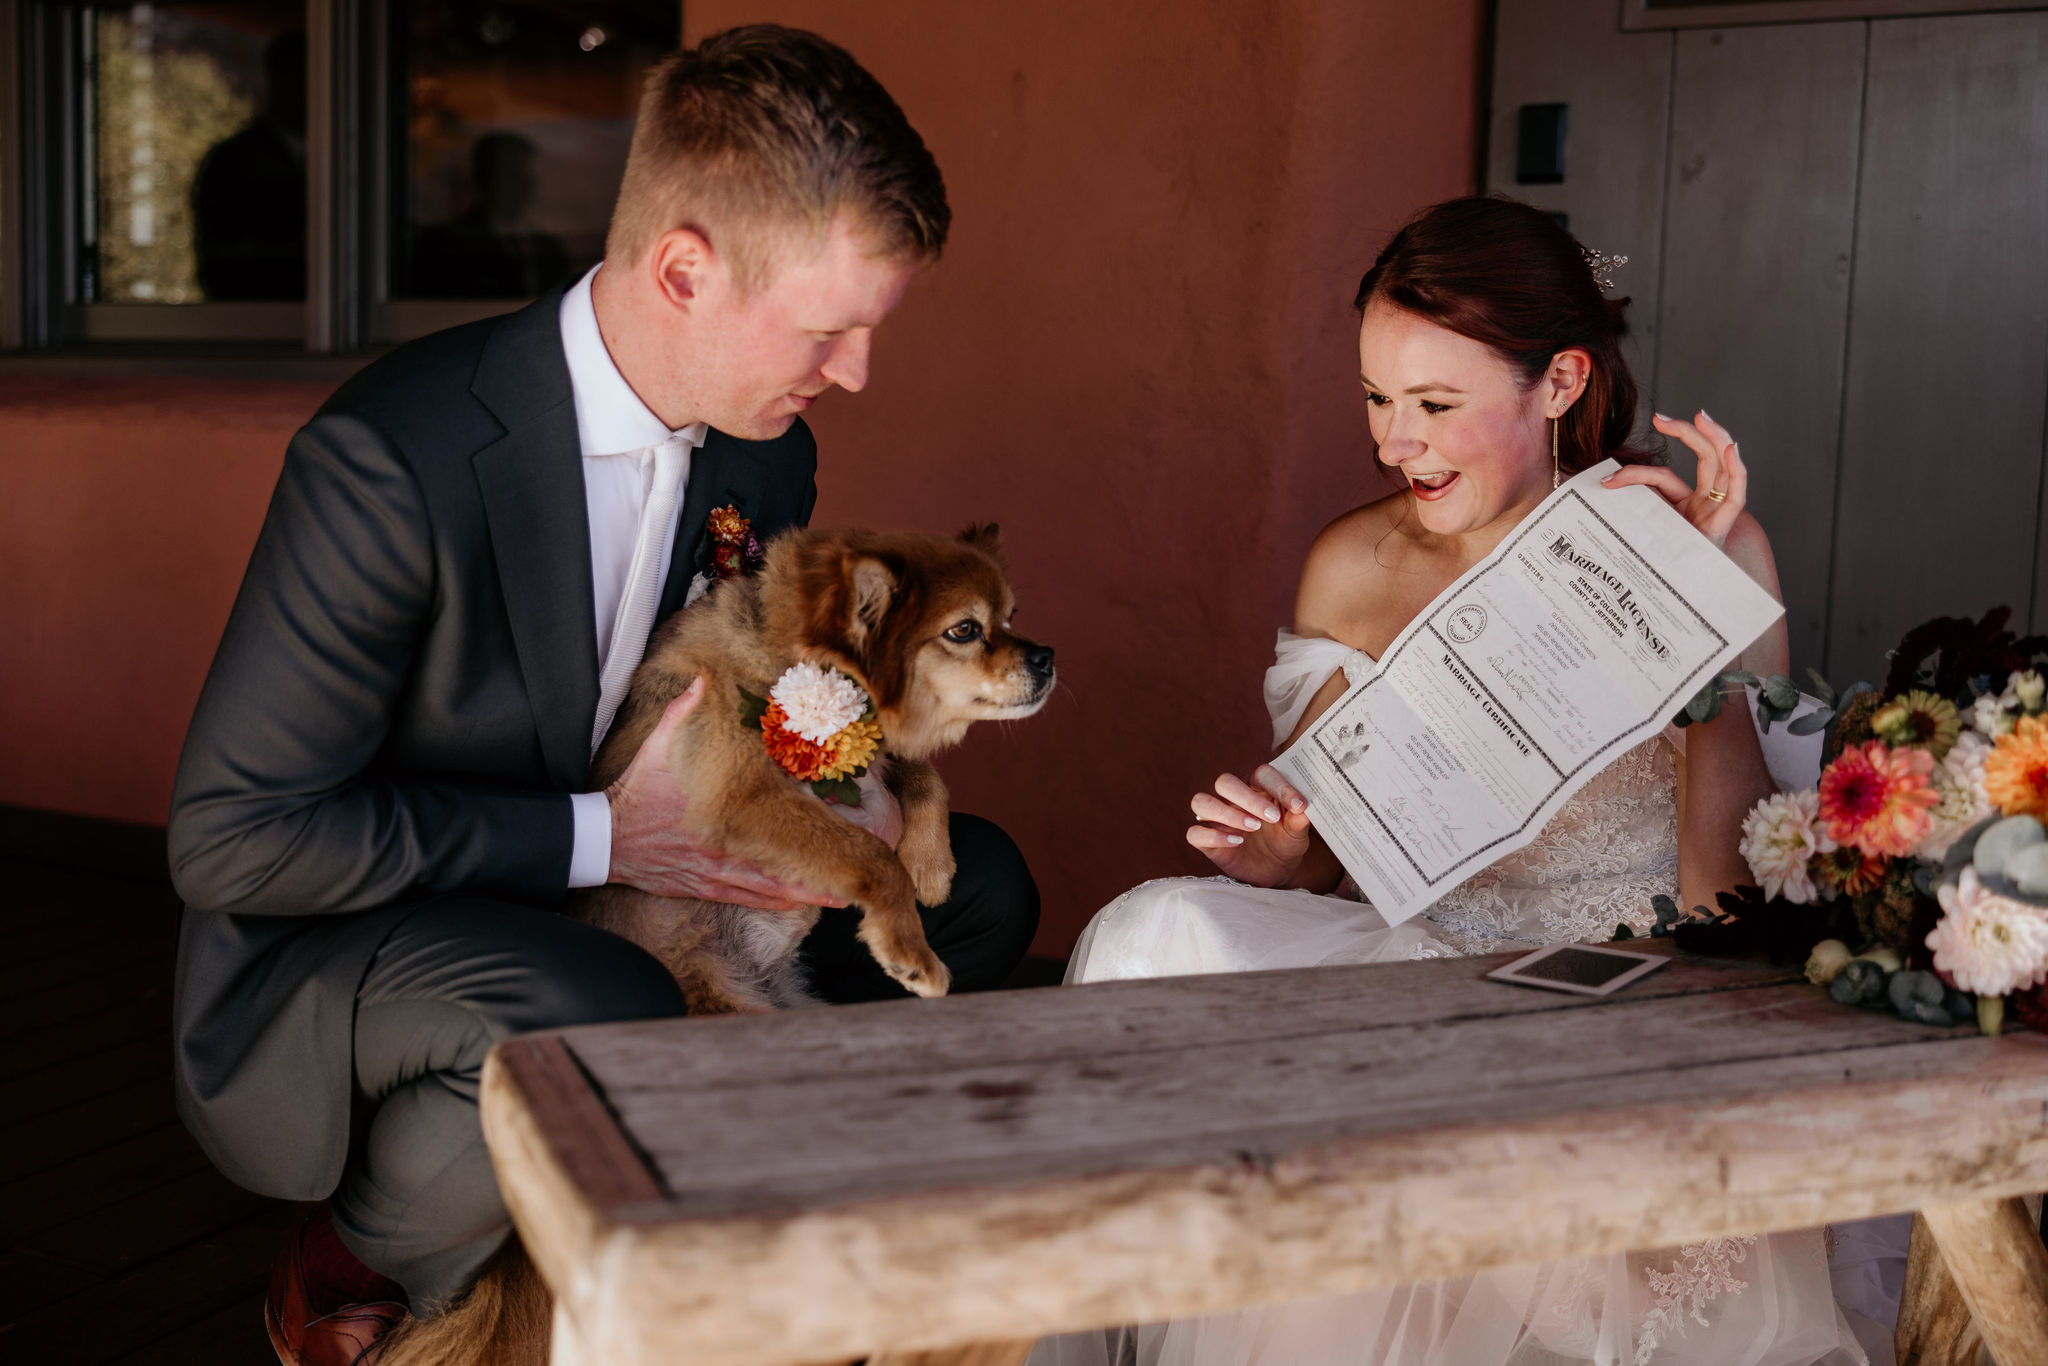 groom holds dog as bride shows dog the marriage certificate.